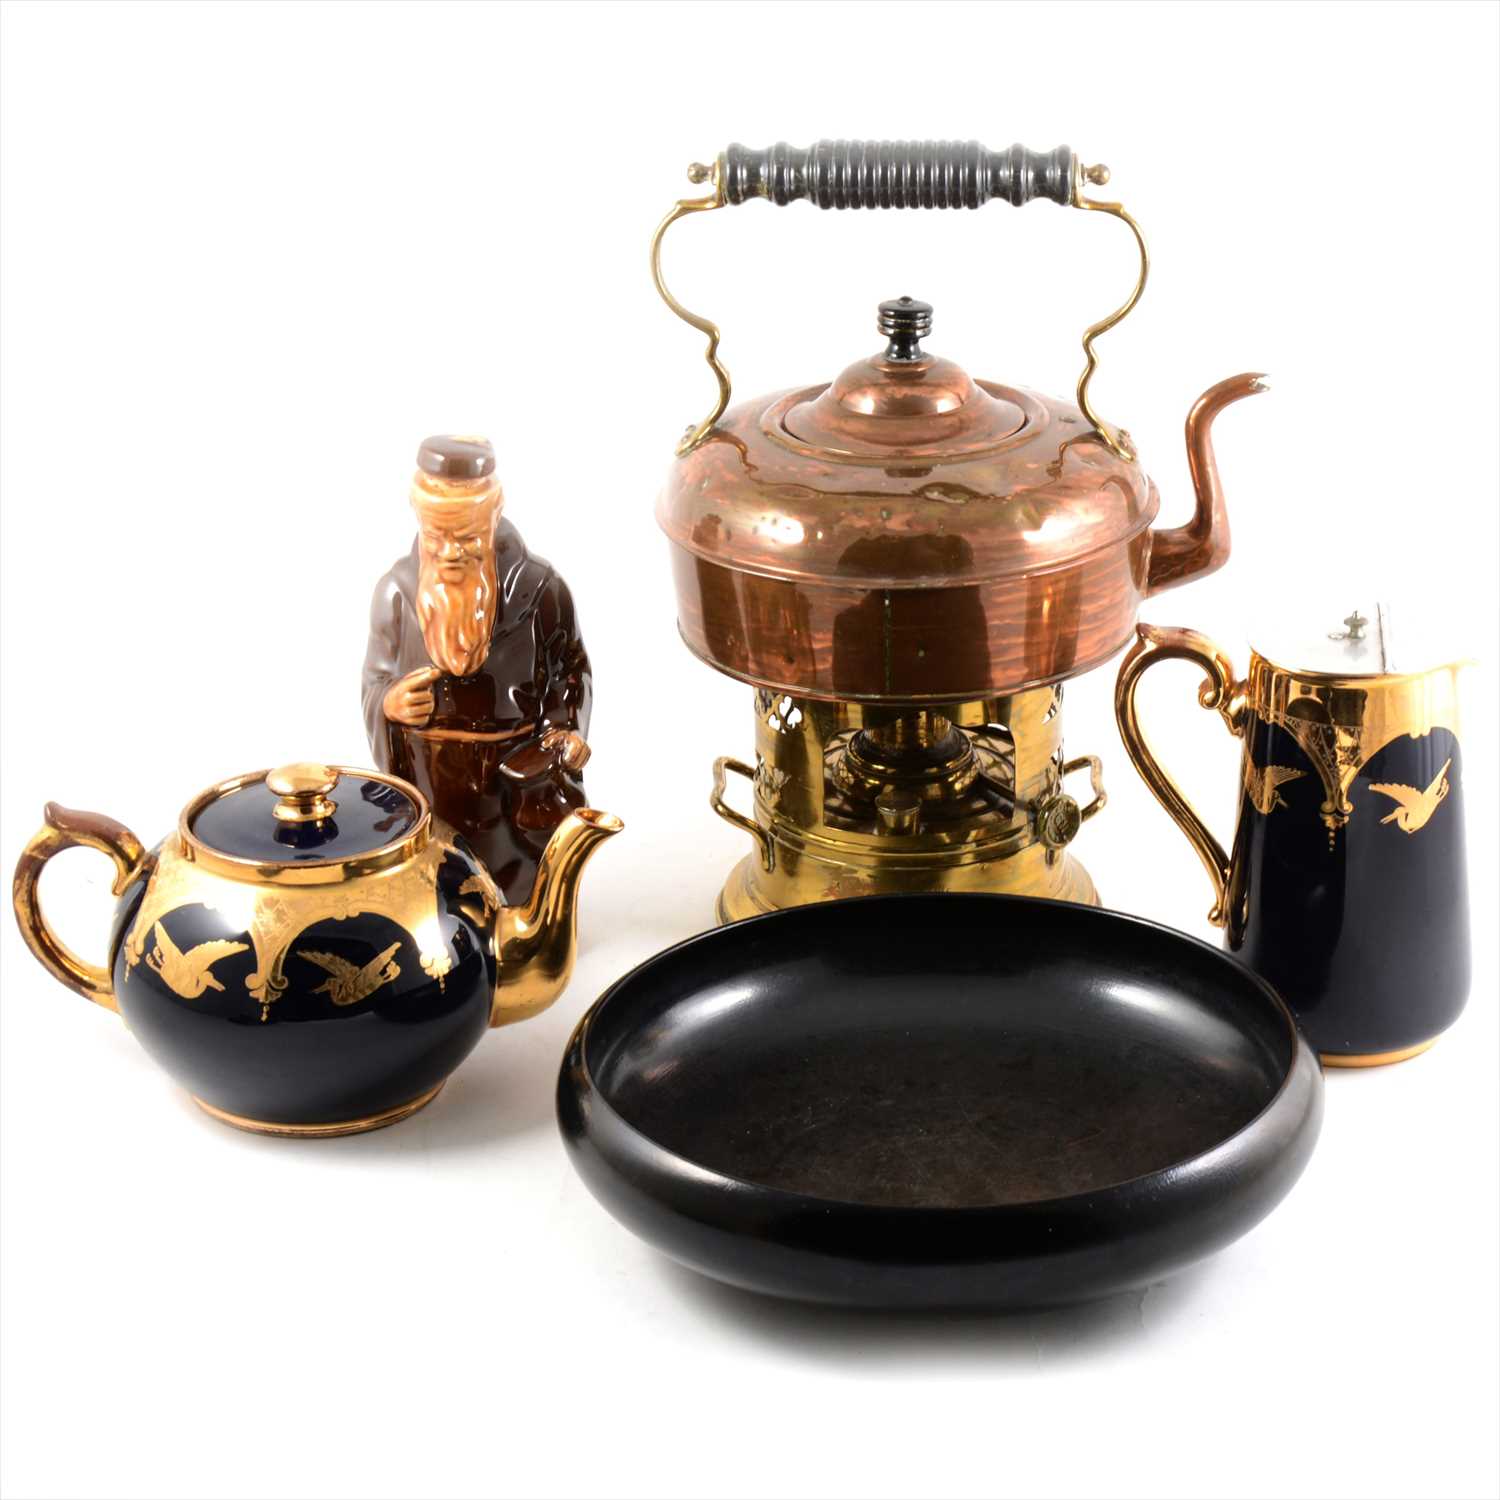 Lot 15 - A copper kettle with brass burner, Doulton black dish, teapot, milk jug and monk decanter.